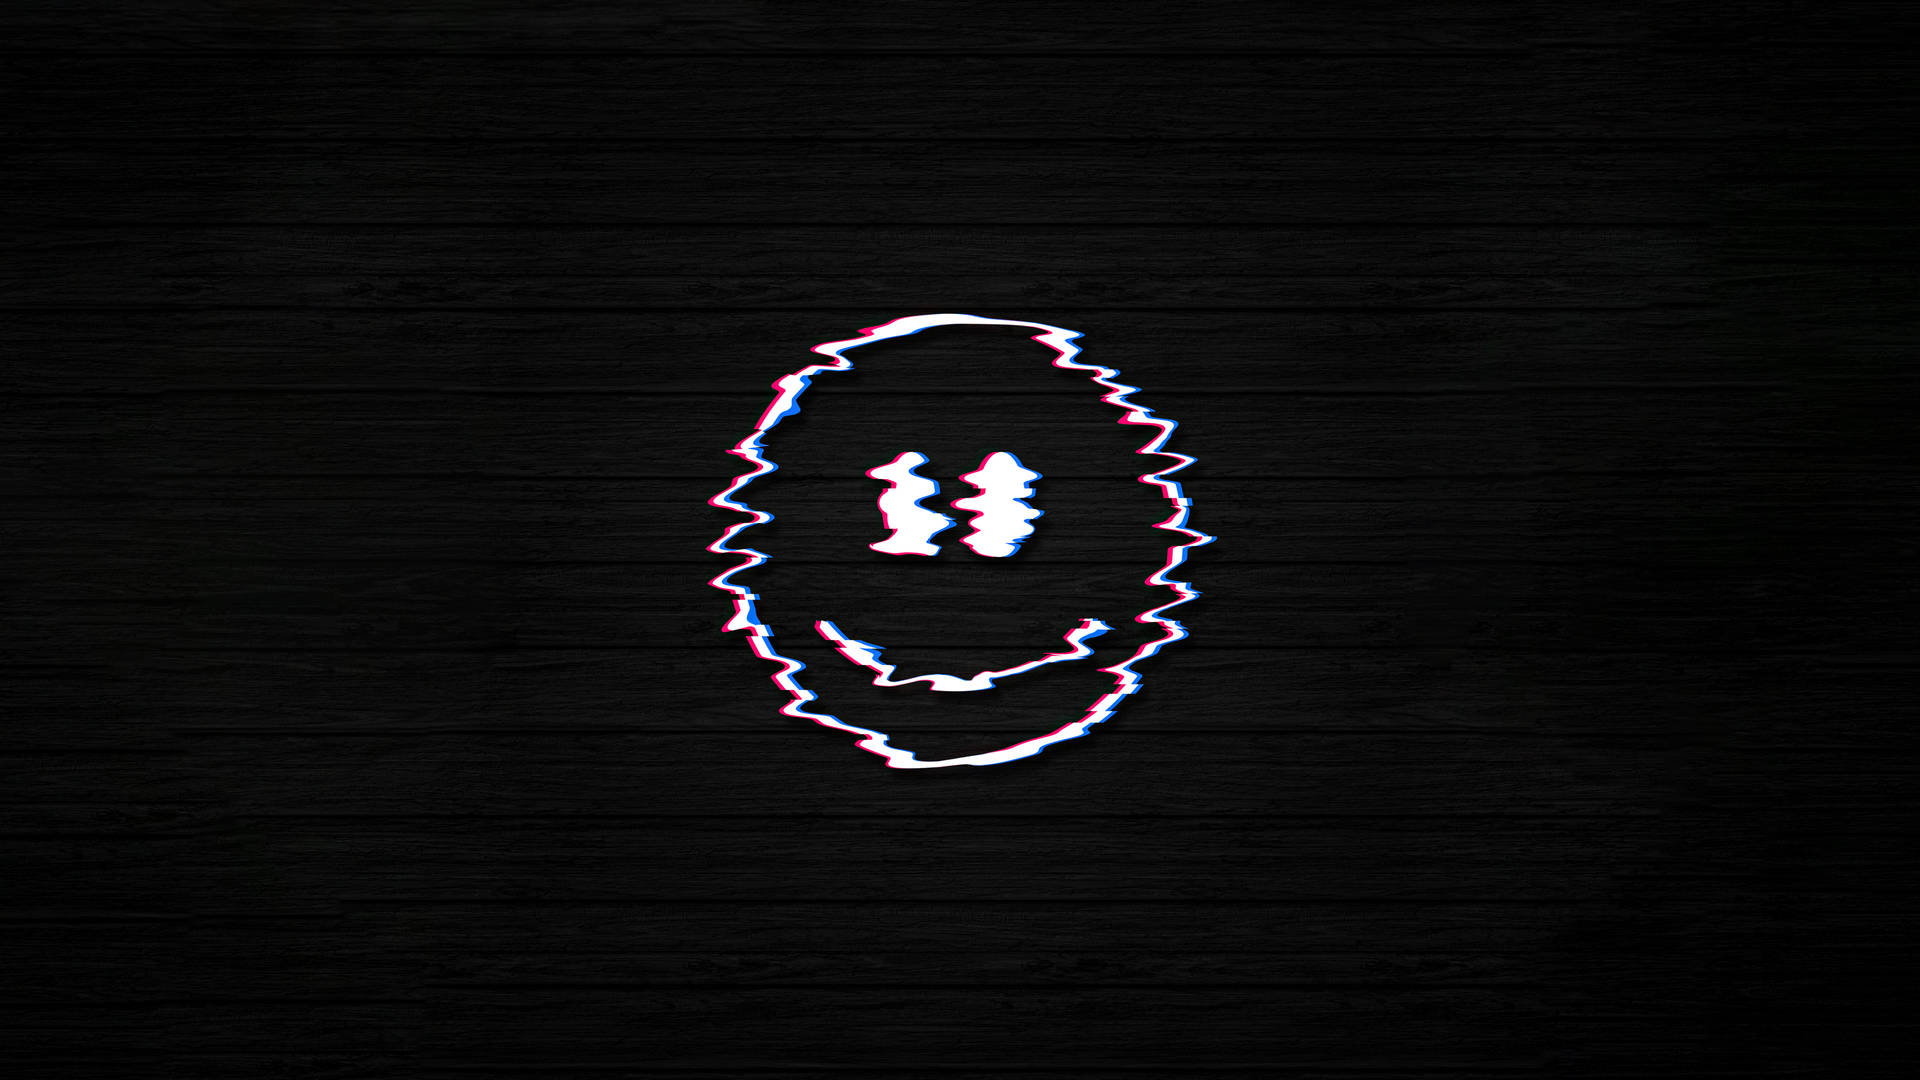 Glitch Smiley Face In Solid Black